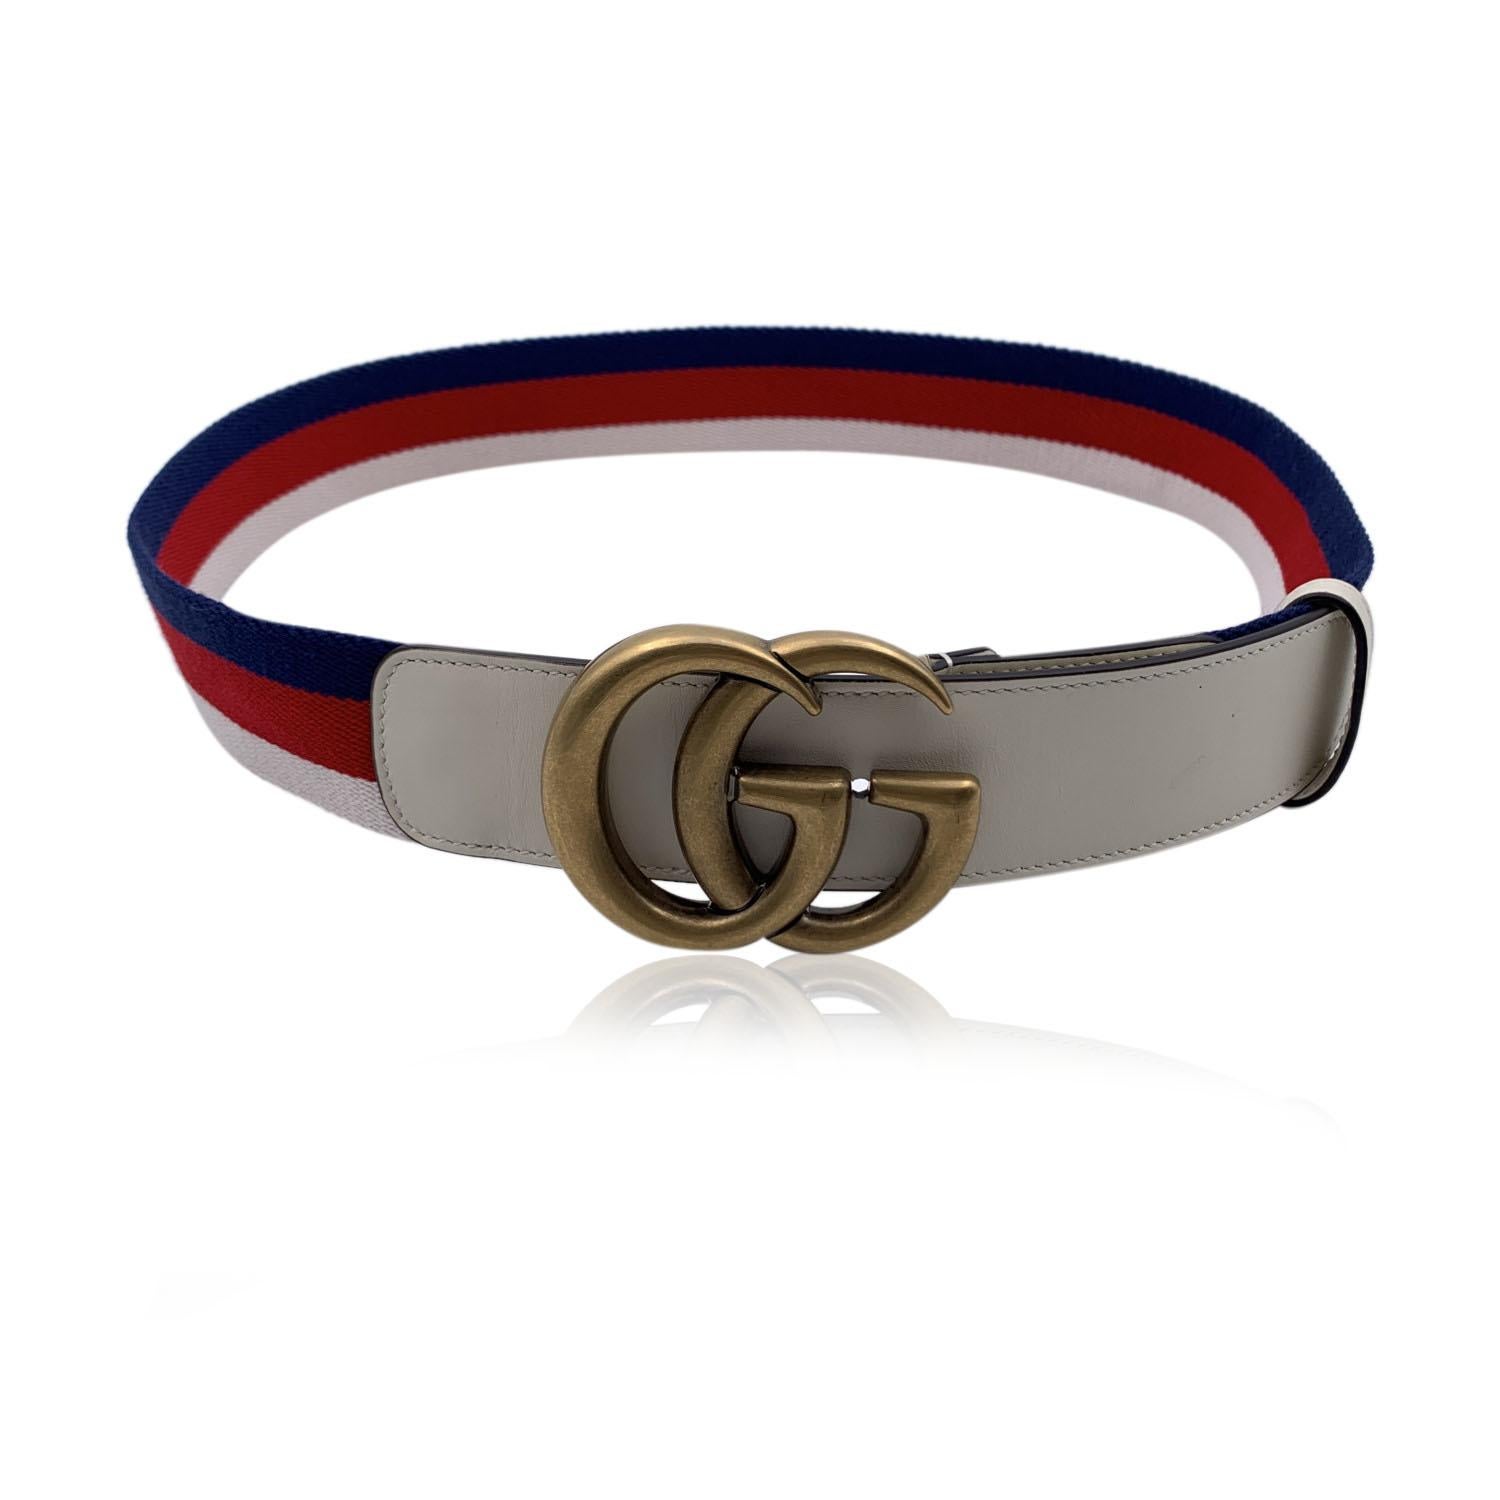 Gucci black leather 'Marmont' unisex belt. Gold metal GG buckle. Width: 1.5 inches - 3.8 cm. 'GUCCI - Made in Italy' engraved on the reverse of the belt, serial number engraved on the reverse of the belt. 3 holes adjustment. Size: 85/34 . Total